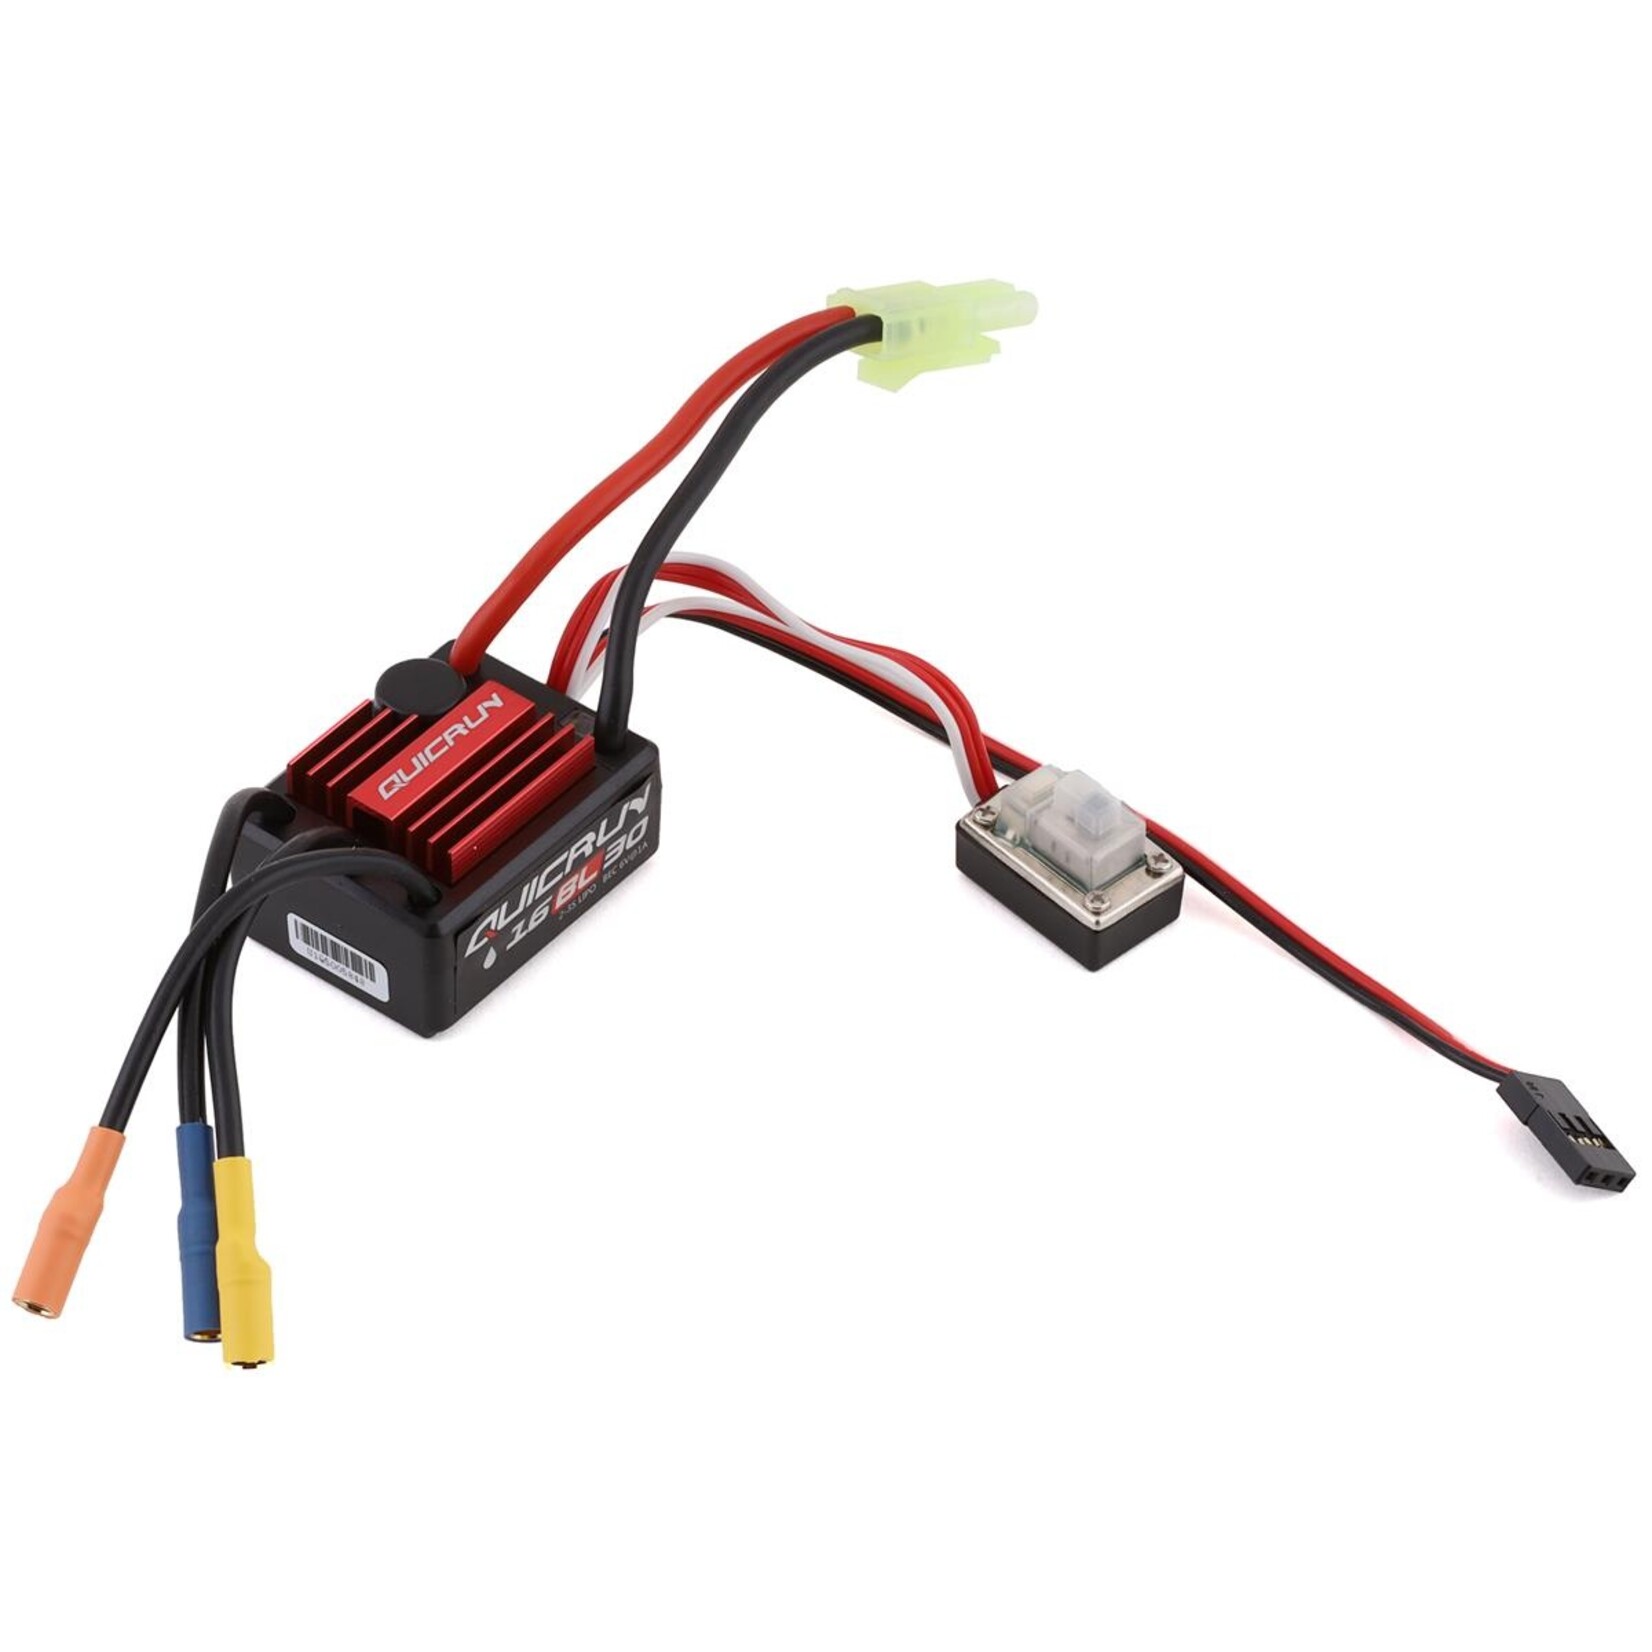 Hobbywing Hobbywing Quicrun WP-16BL30 Waterproof 1/18th Scale Brushless ESC #30110000